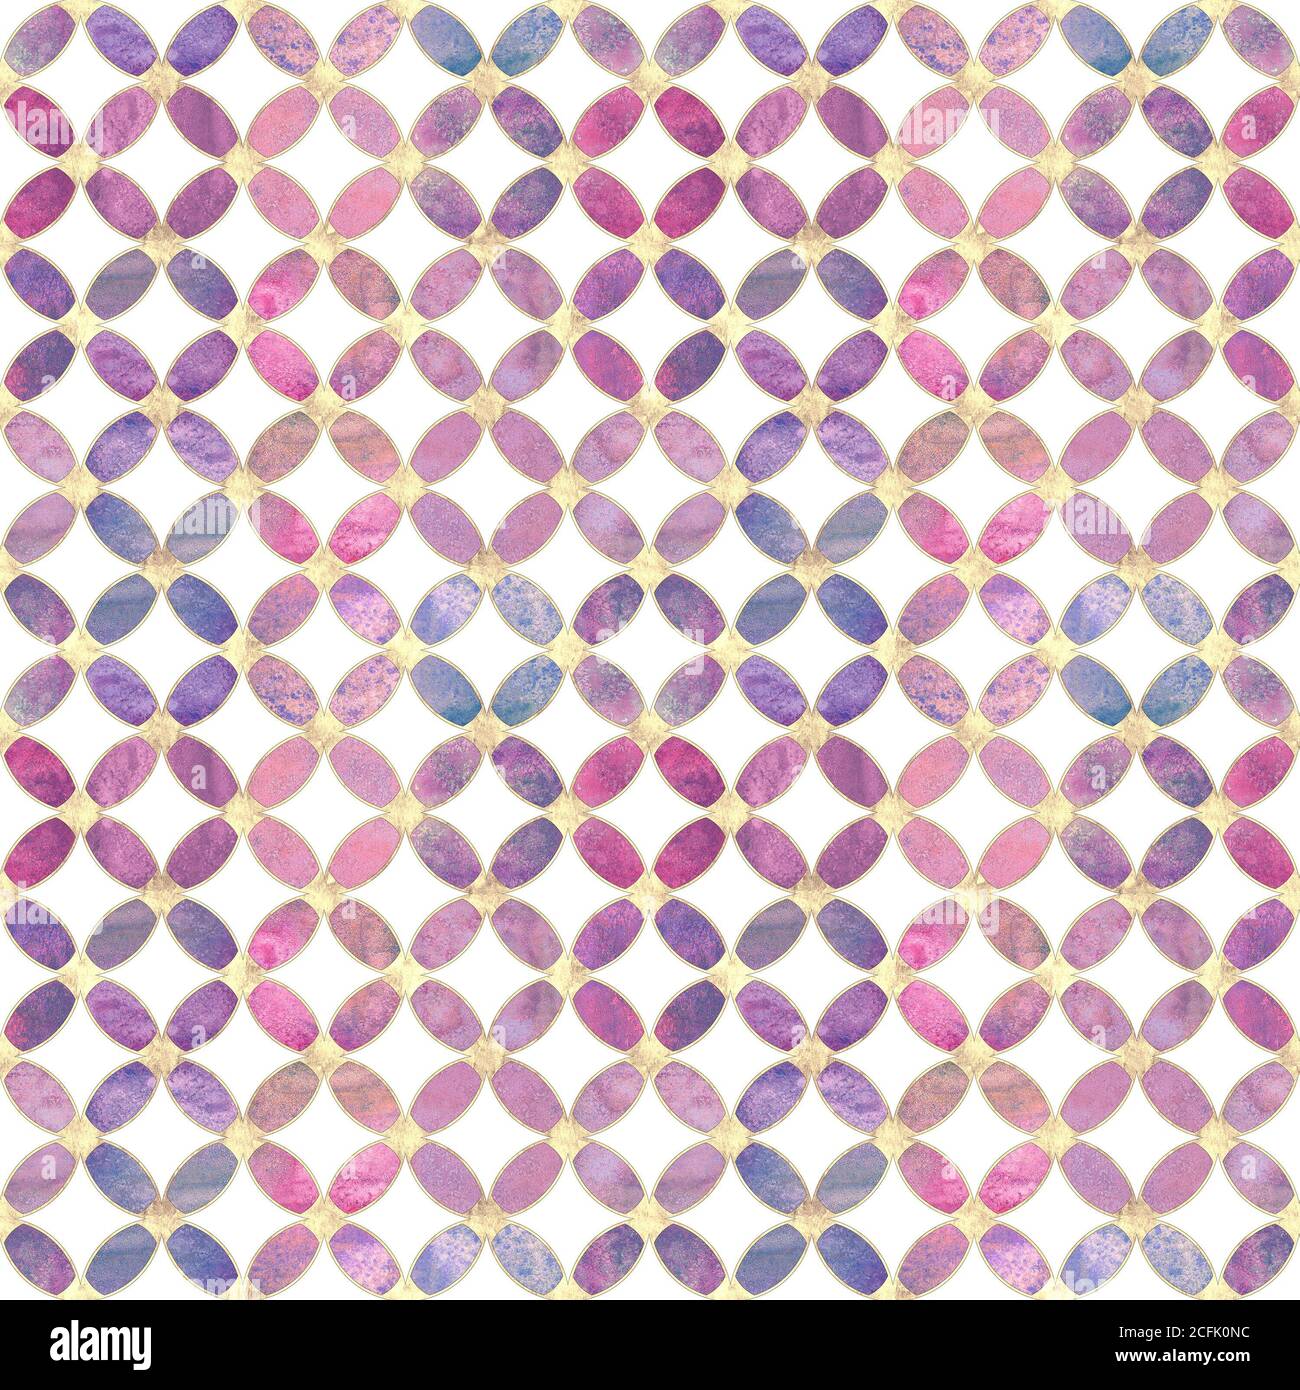 Seamless watercolour colorful pink purple gold glitter abstract texture. Watercolor hand drawn background with overlapping circles and golden contour Stock Photo